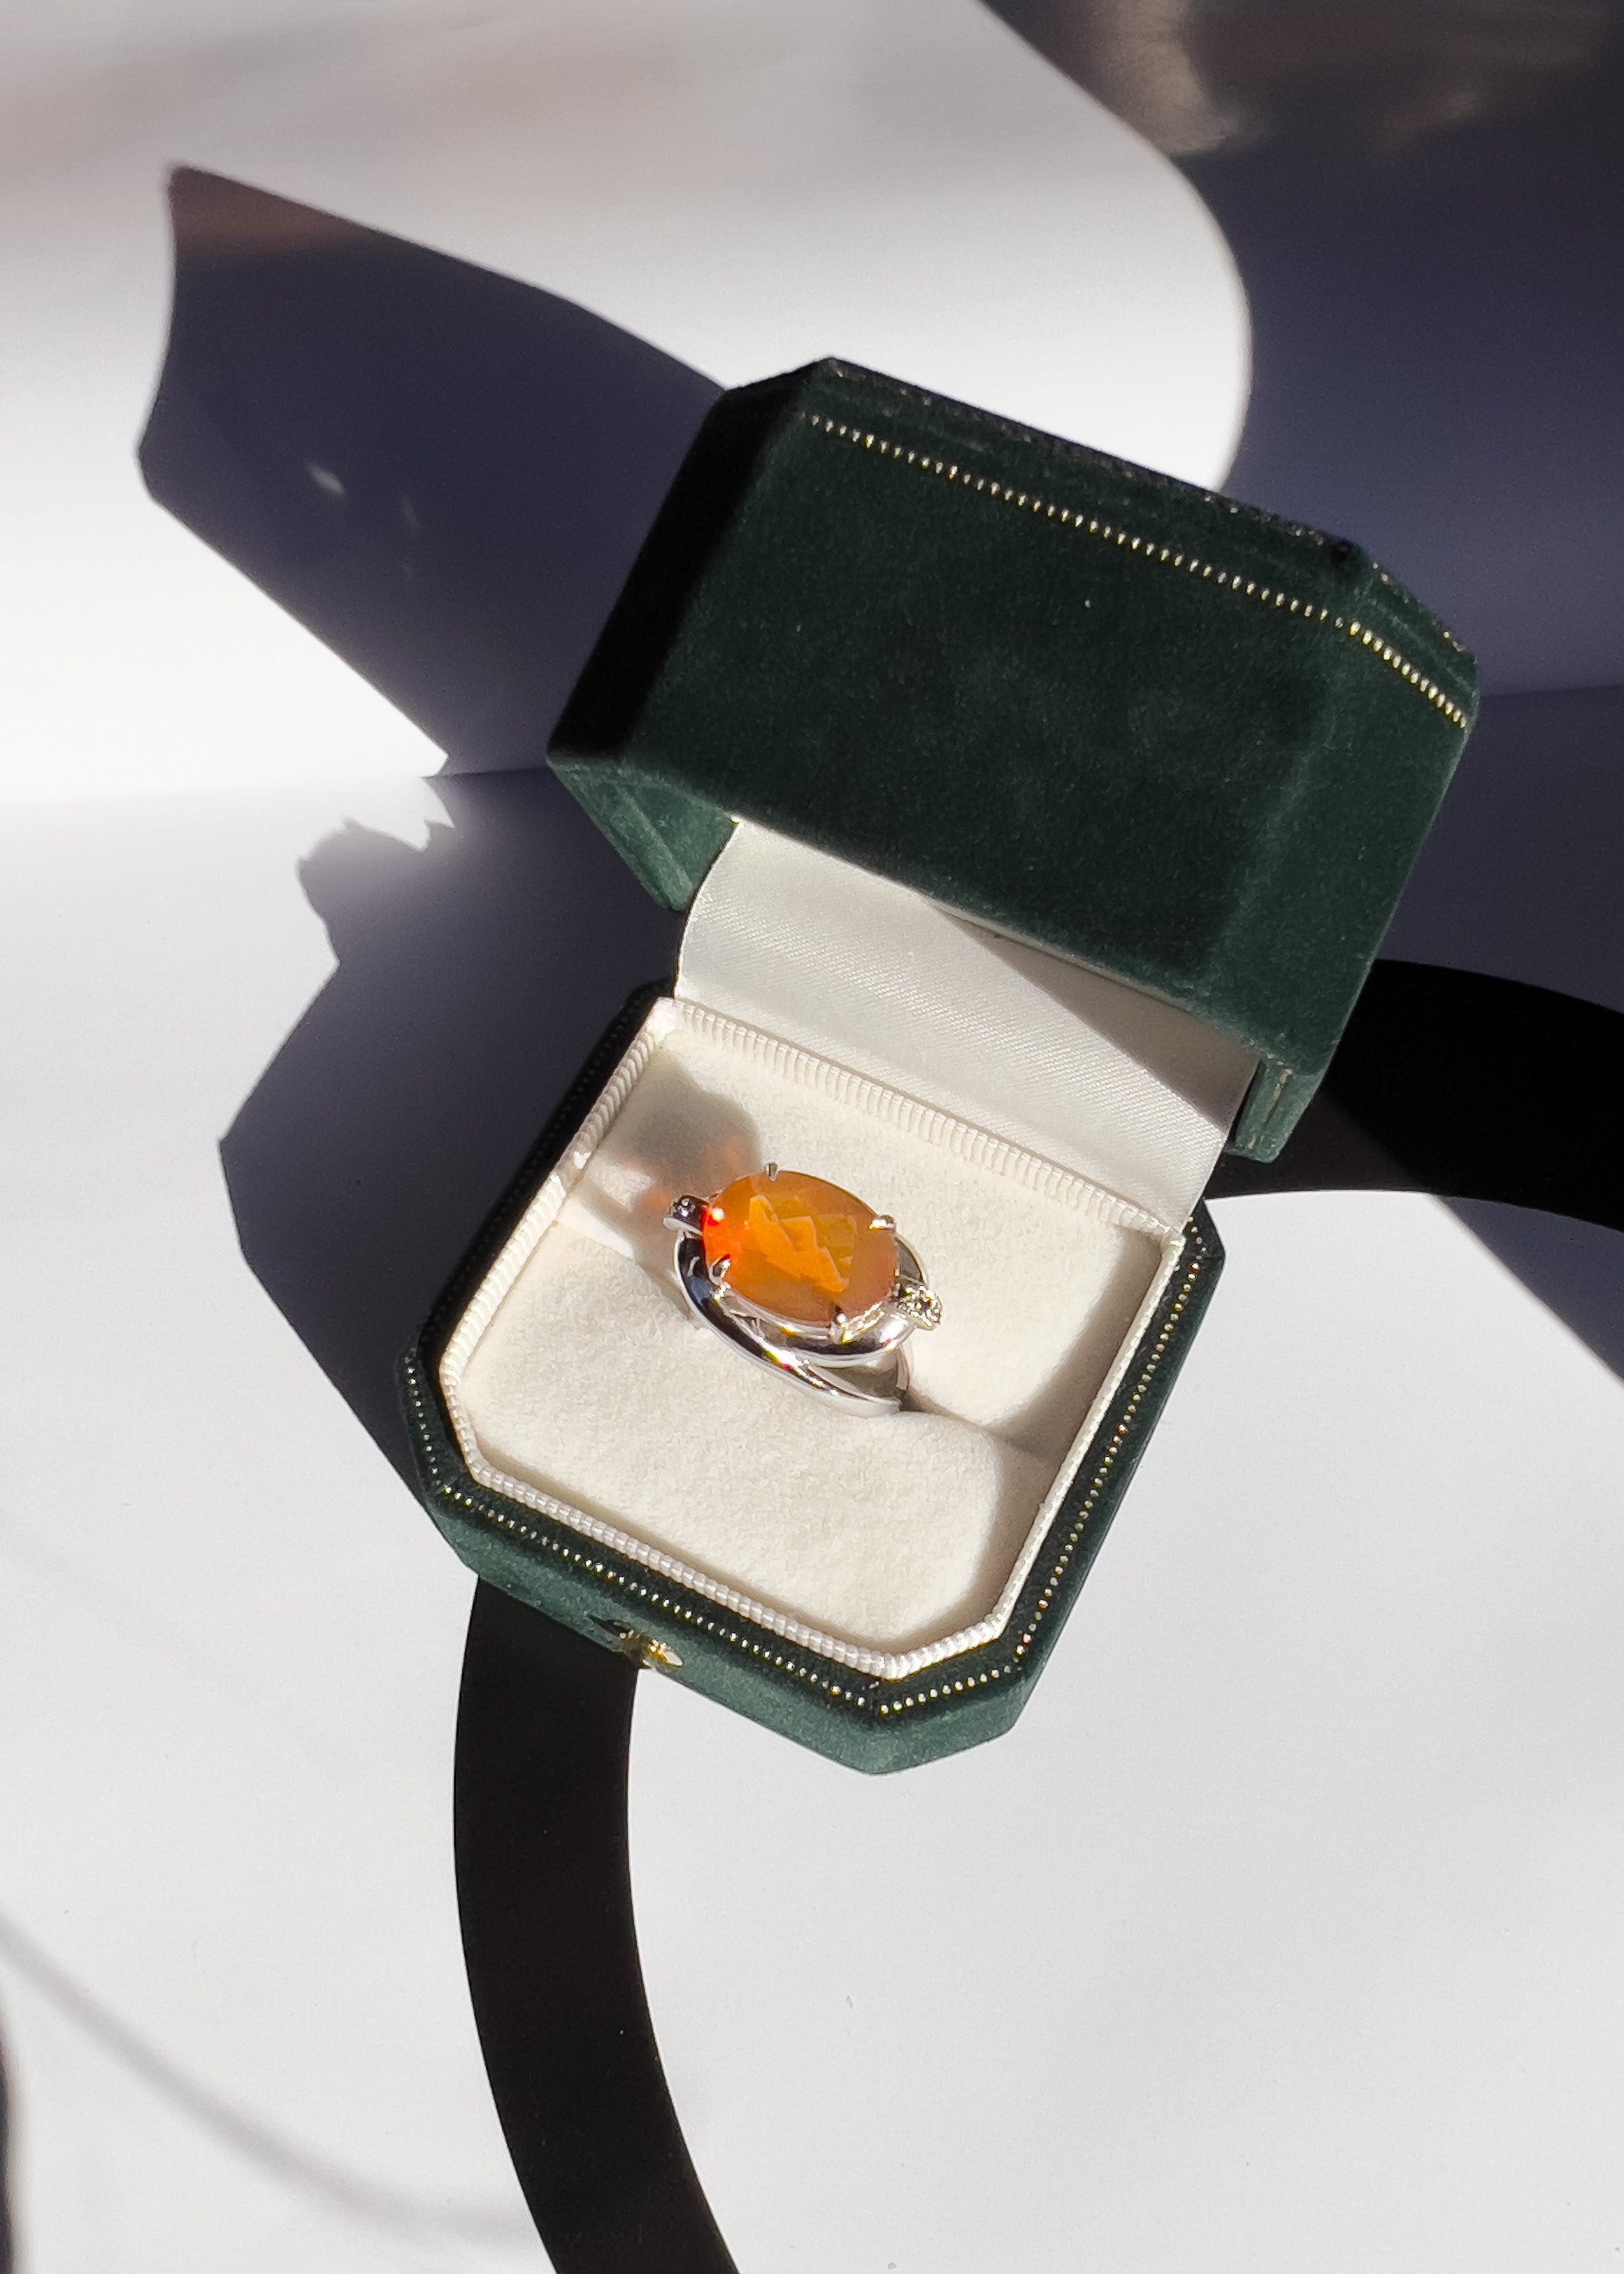 Sunset Garibaldi Fire Opal with Sapphire Cocktail Ring